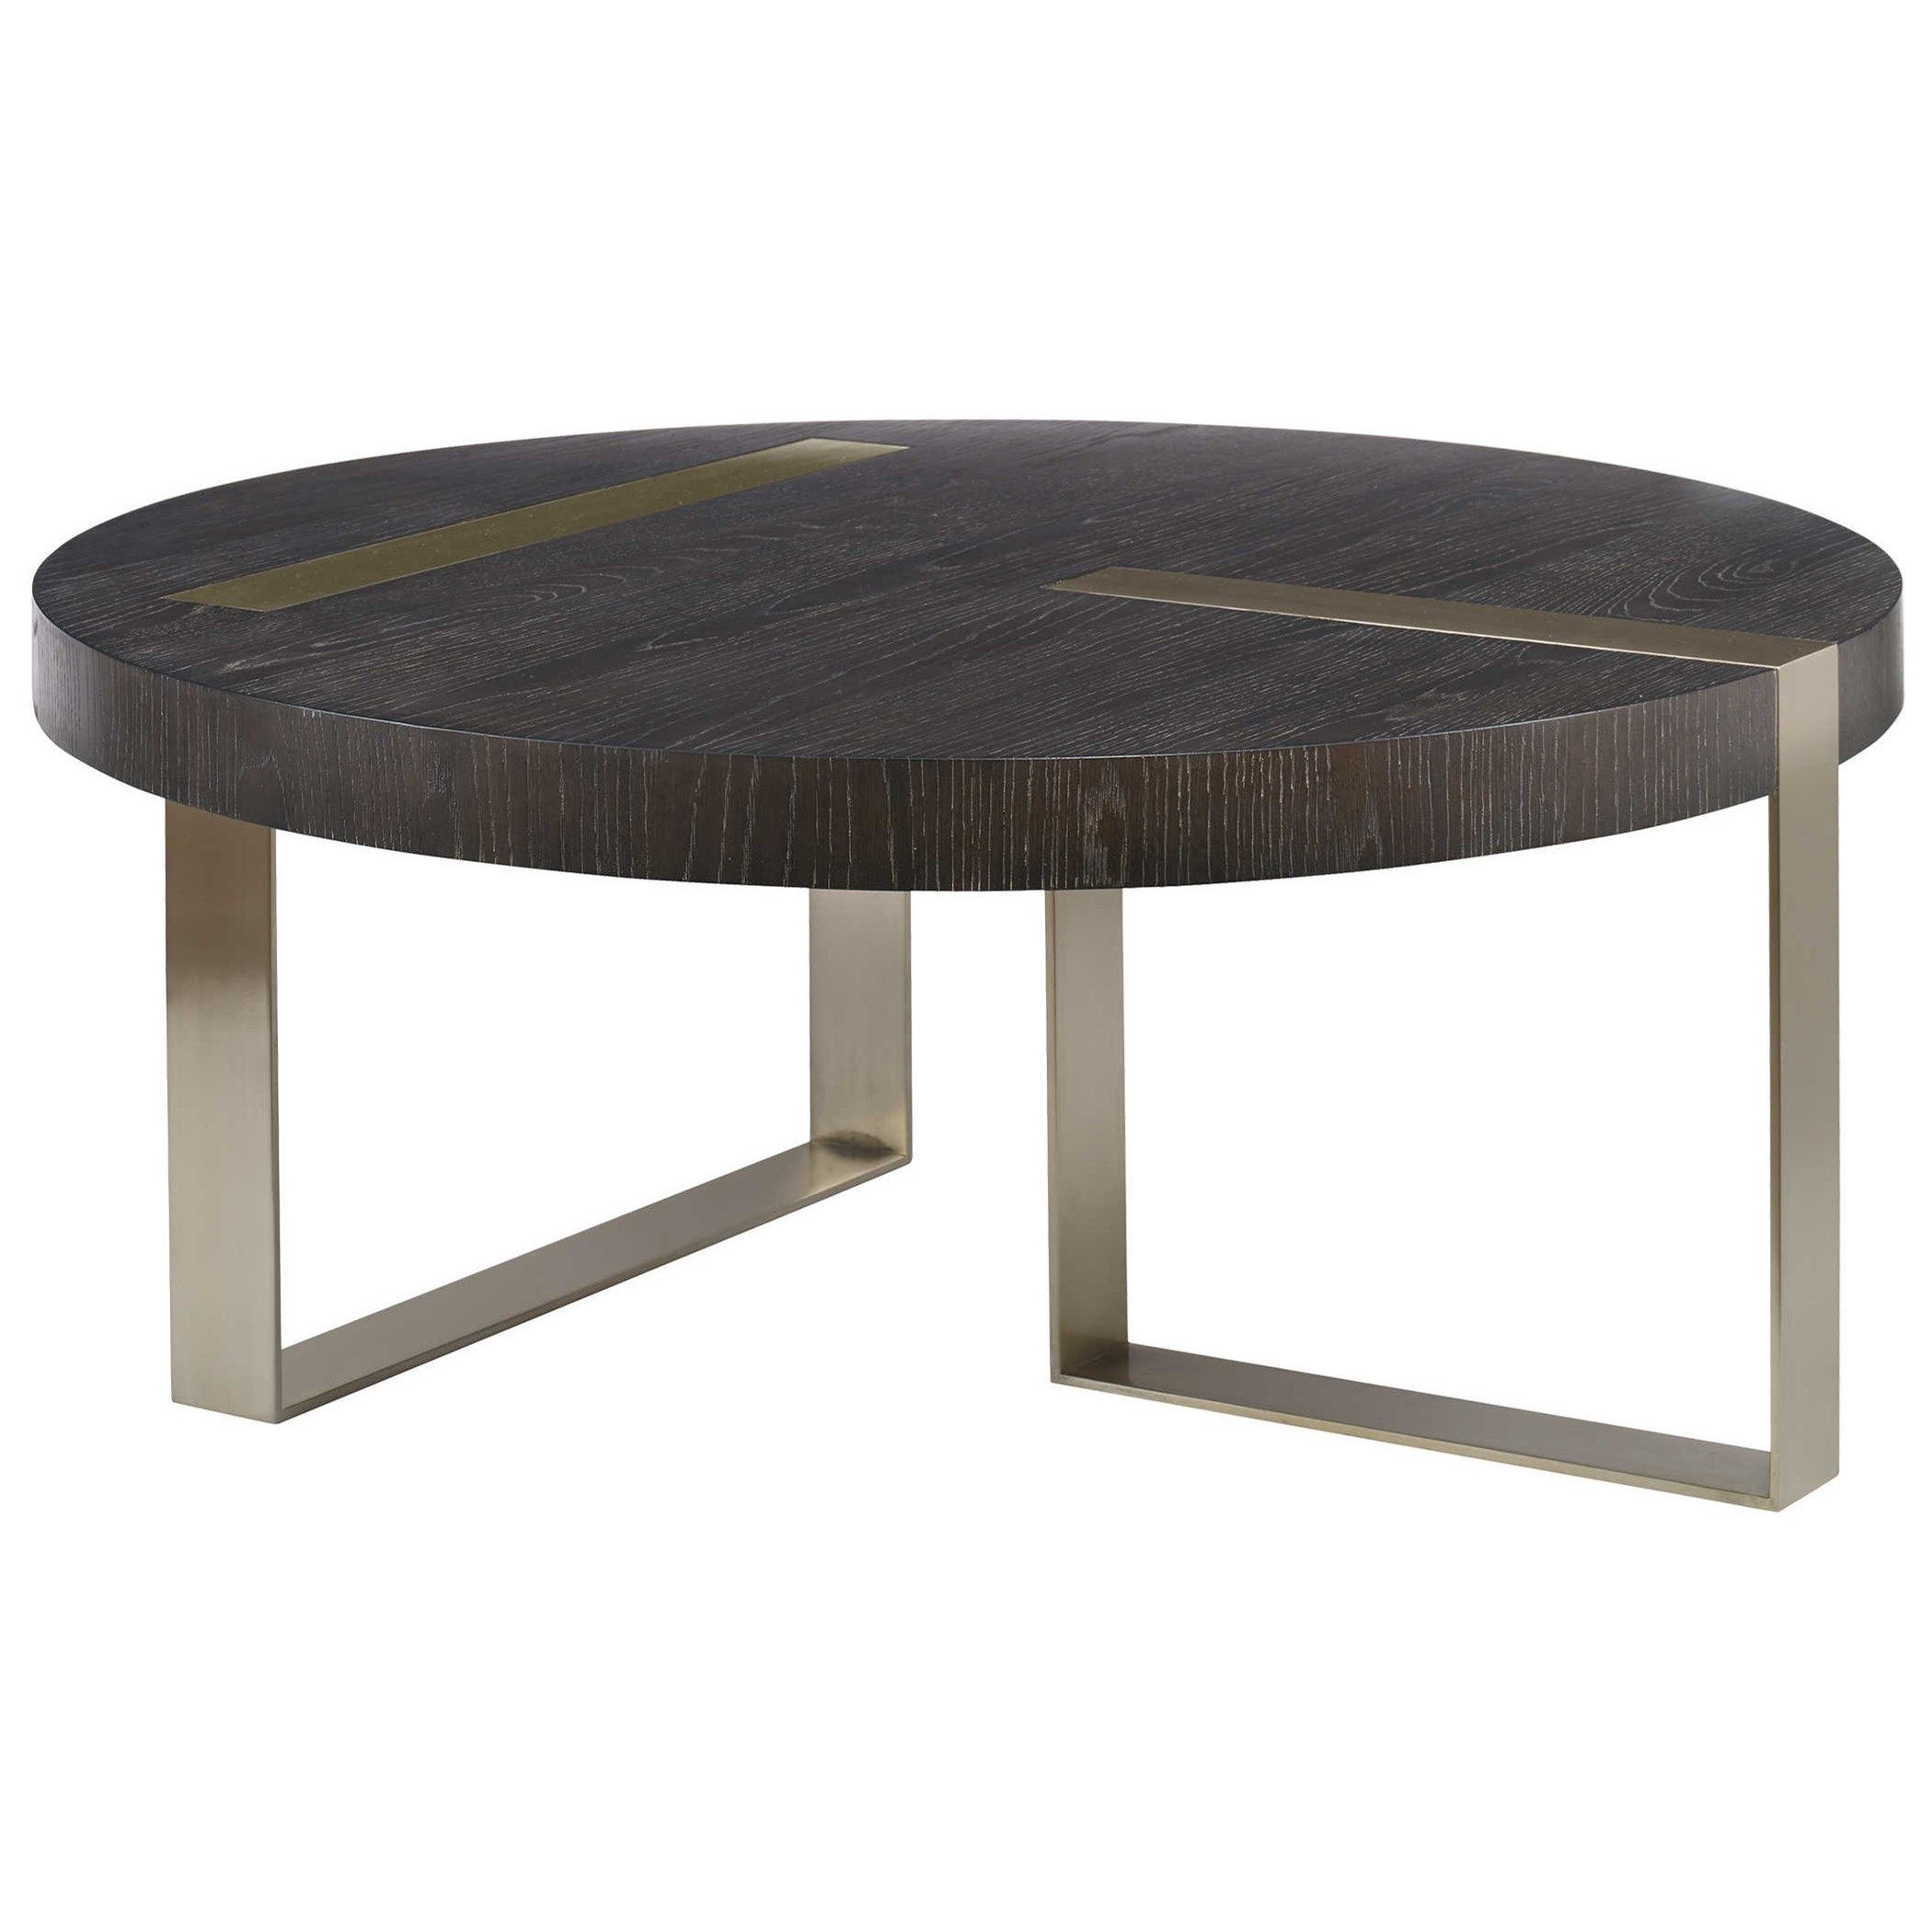 Uttermost Accent Furniture – Occasional Tables Converge Round Coffee Within Occasional Coffee Tables (Gallery 5 of 20)